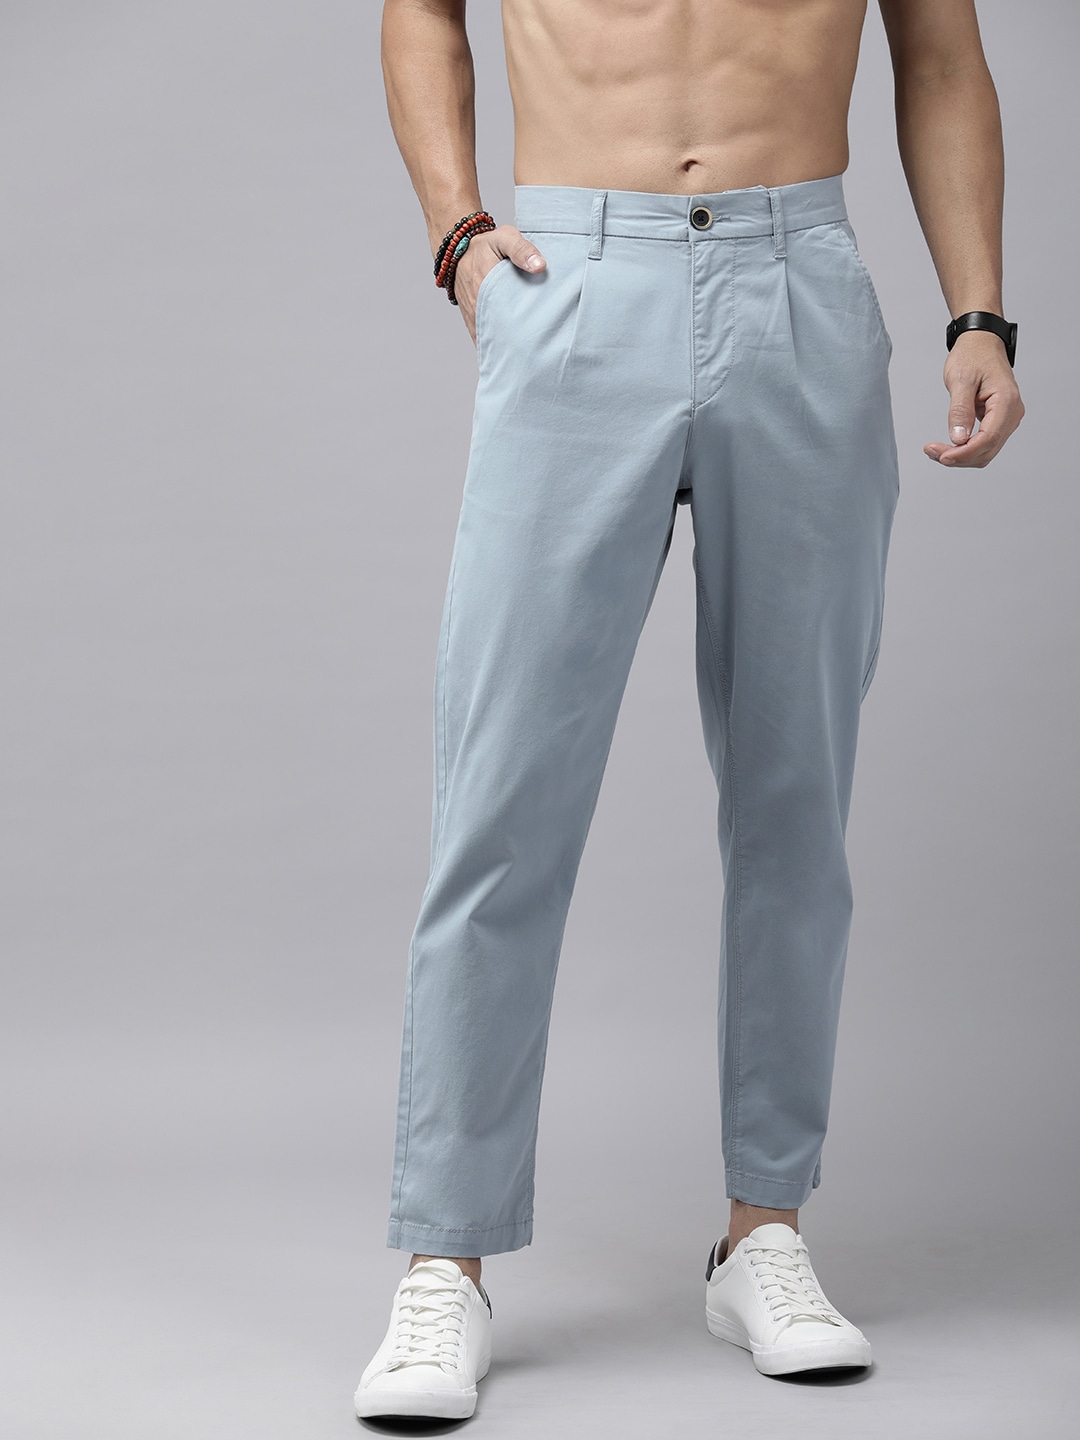 The Roadster Lifestyle Co. Men Solid Relaxed Fit Pleated Chinos Trousers